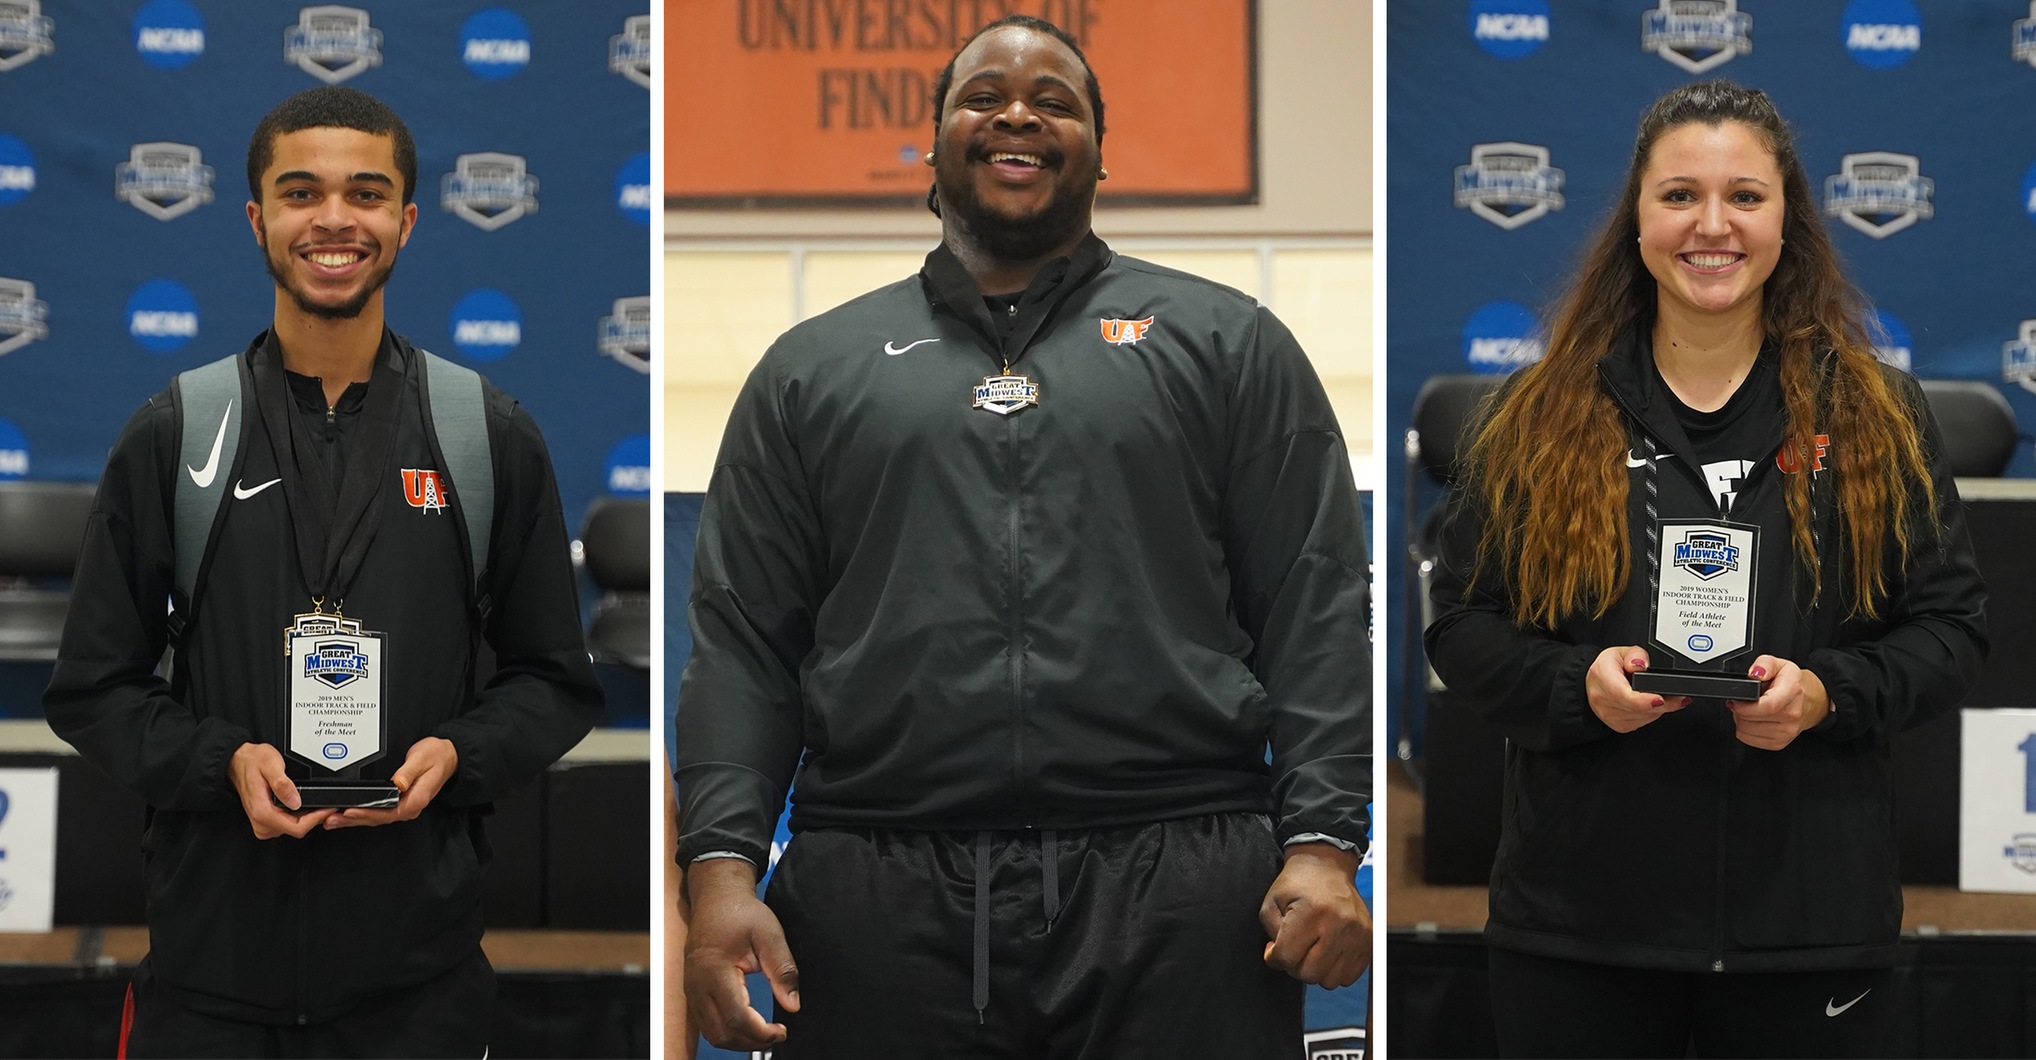 Oilers Electrify Crowd on Final Day of G-MAC Championship | Henry Sets DII Shot Put Record